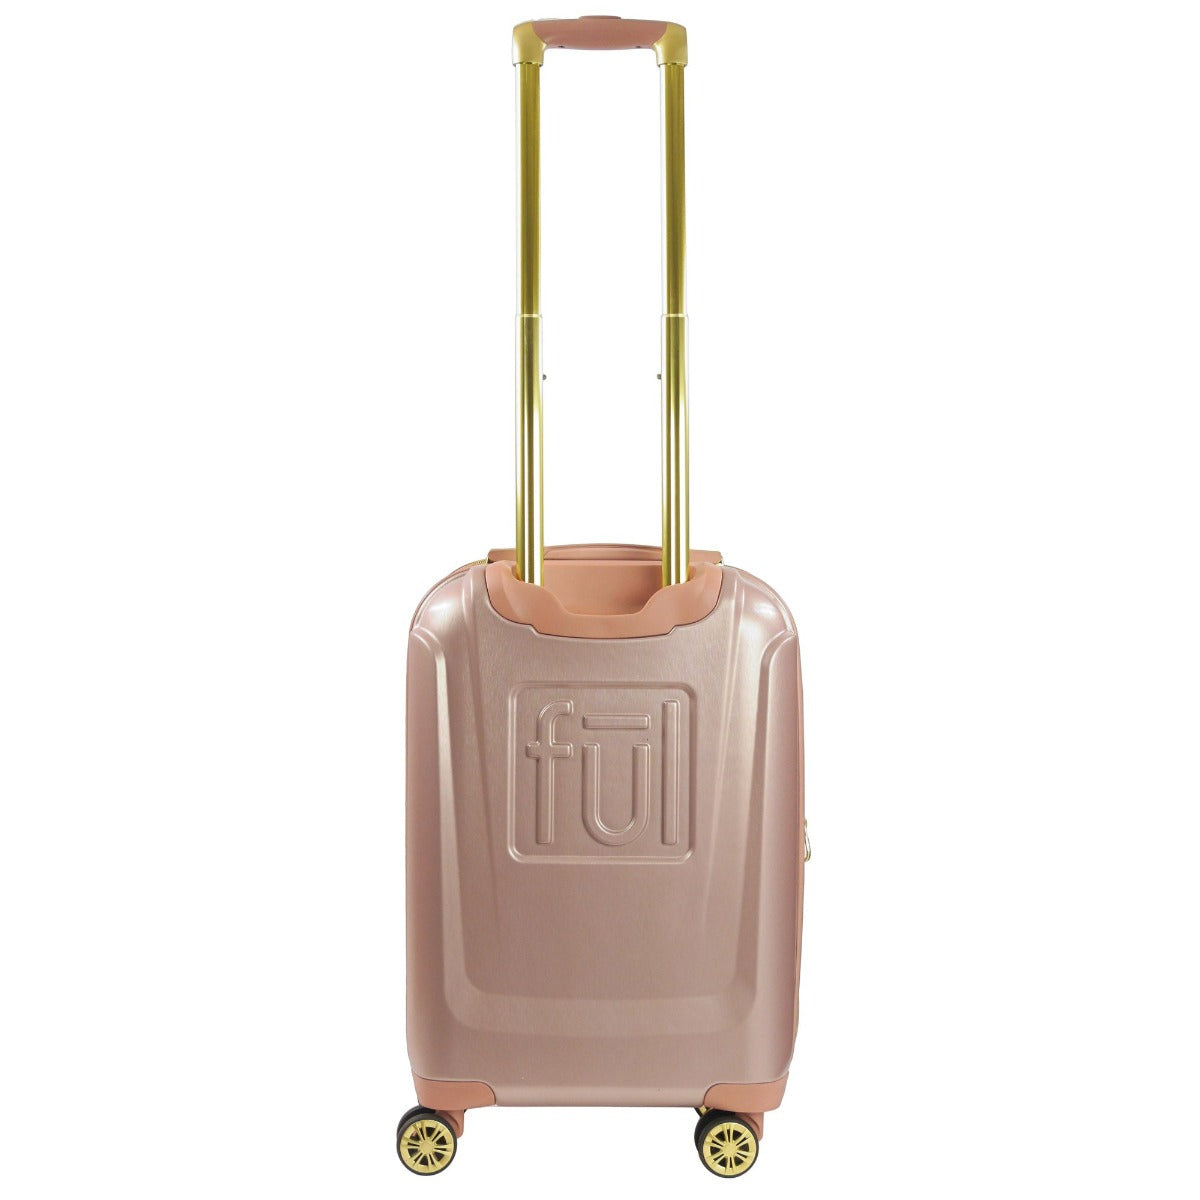 Disney Ful Playful Minnie Mouse 22" carry on expandable spinner suitcase hard sided luggage rose gold